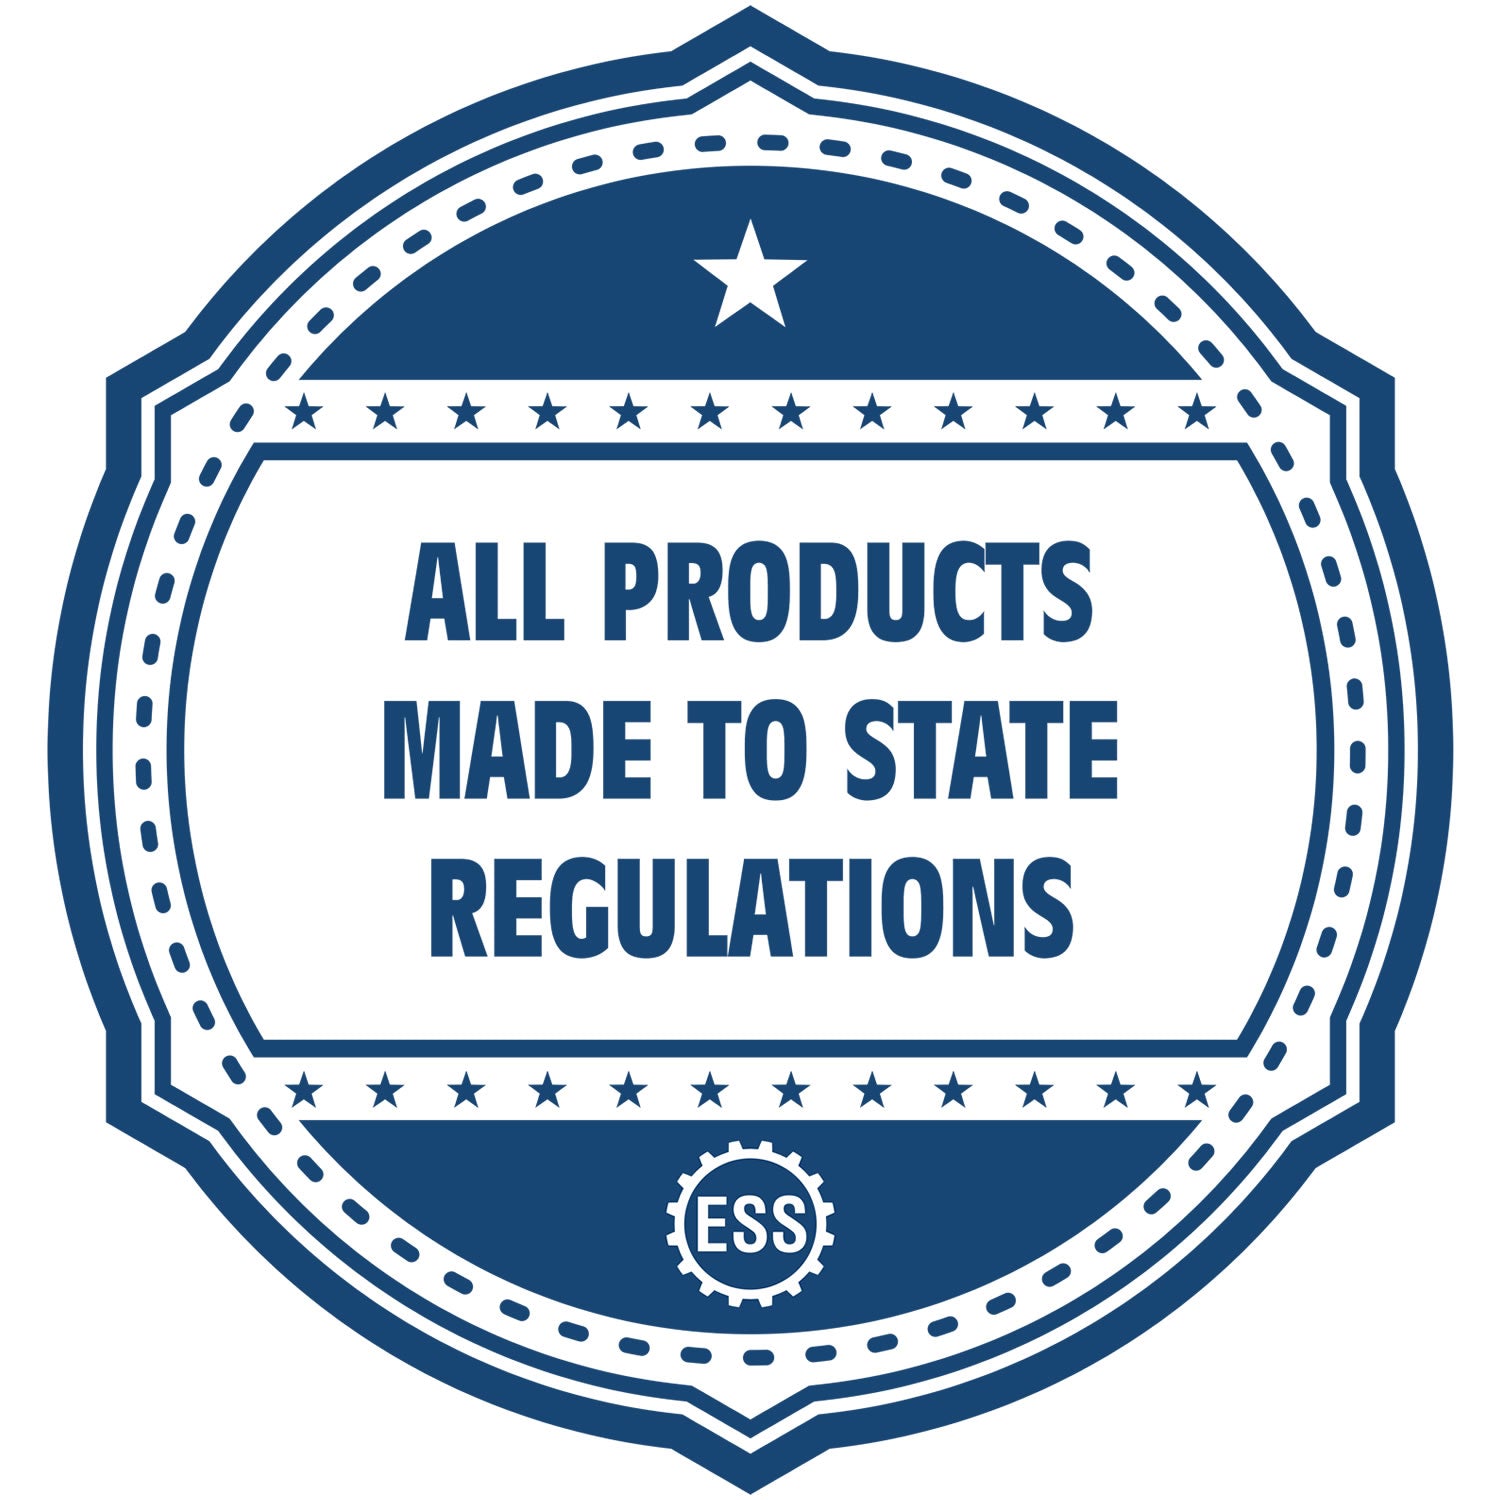 An icon or badge element for the Digital South Dakota PE Stamp and Electronic Seal for South Dakota Engineer showing that this product is made in compliance with state regulations.